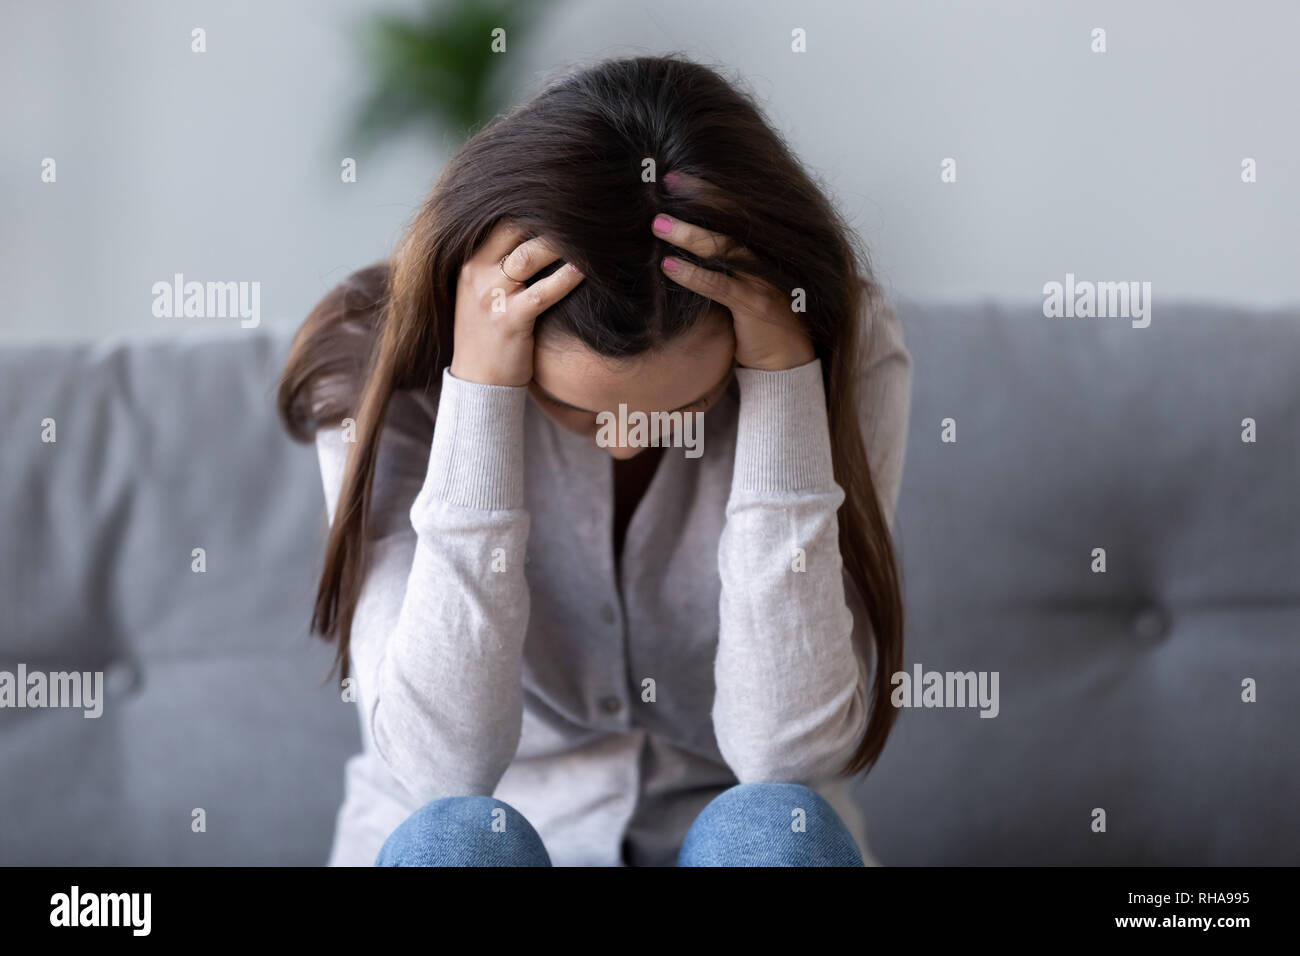 Upset young woman feeling hurt depressed lonely suffering from headache Stock Photo